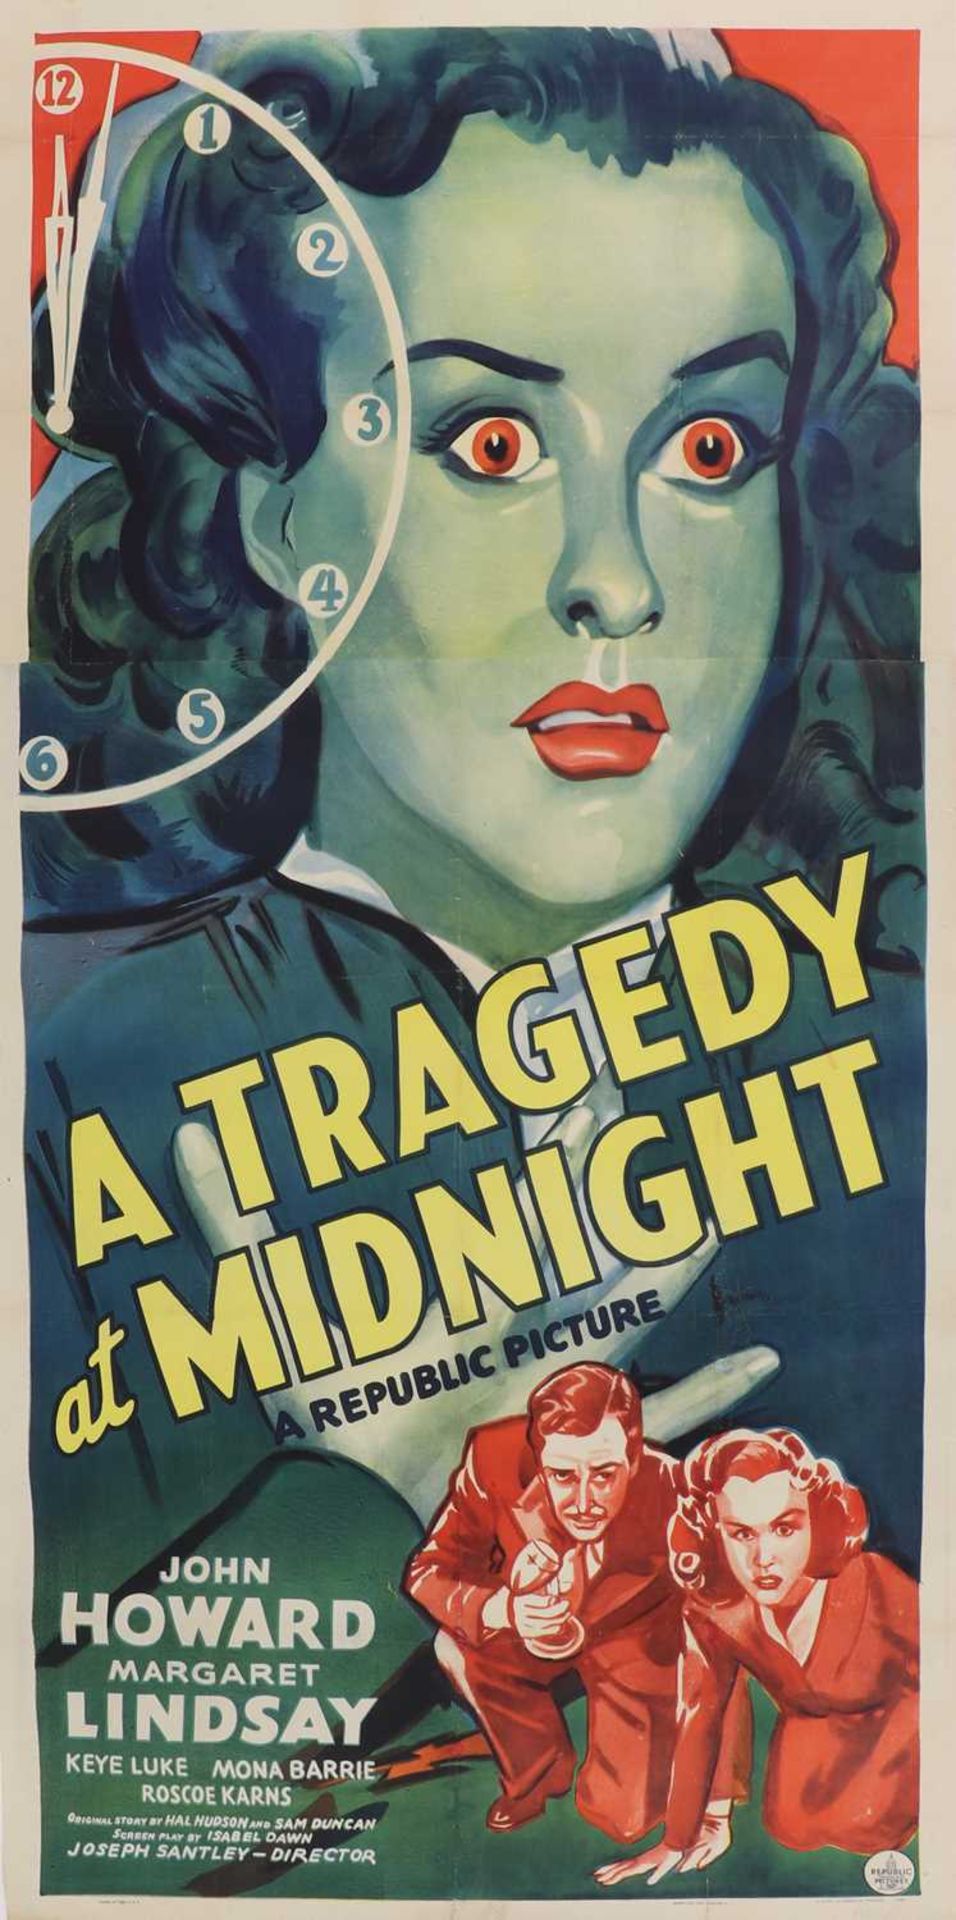 'A TRAGEDY AT MIDNIGHT',